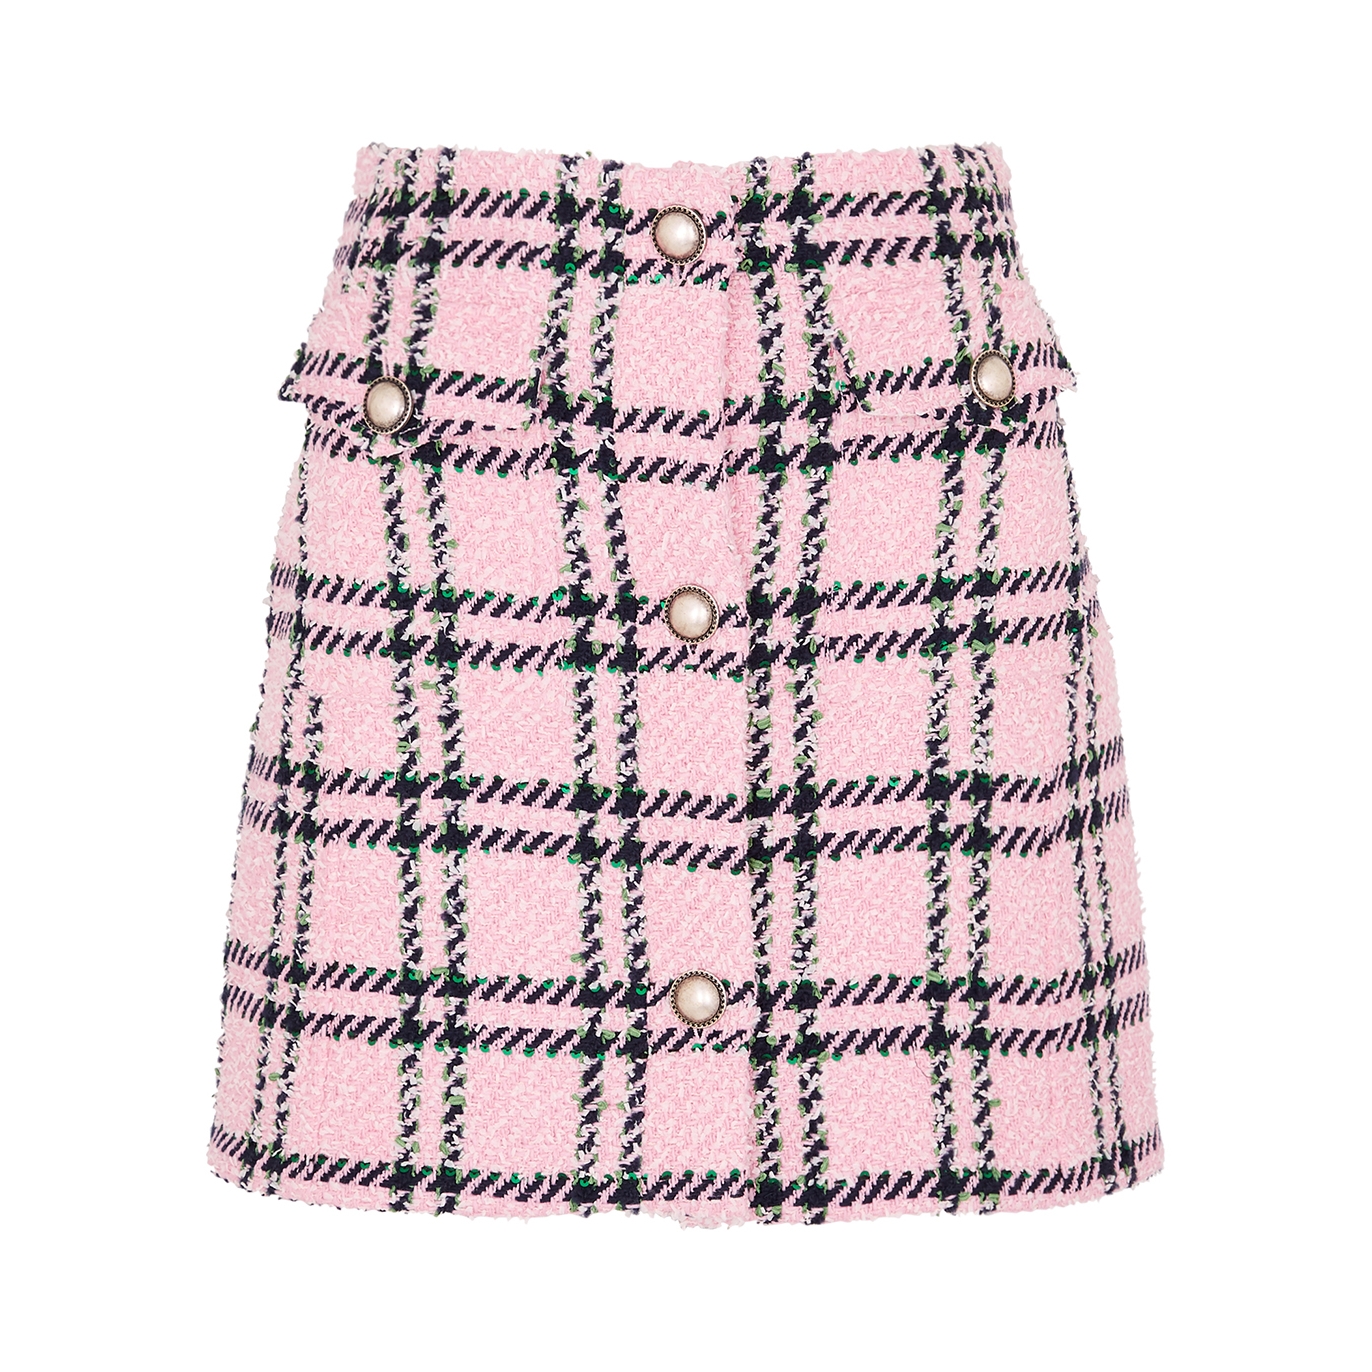 Alessandra Rich Checked Embellished Bouclé Tweed Mini Skirt - Pink - 10